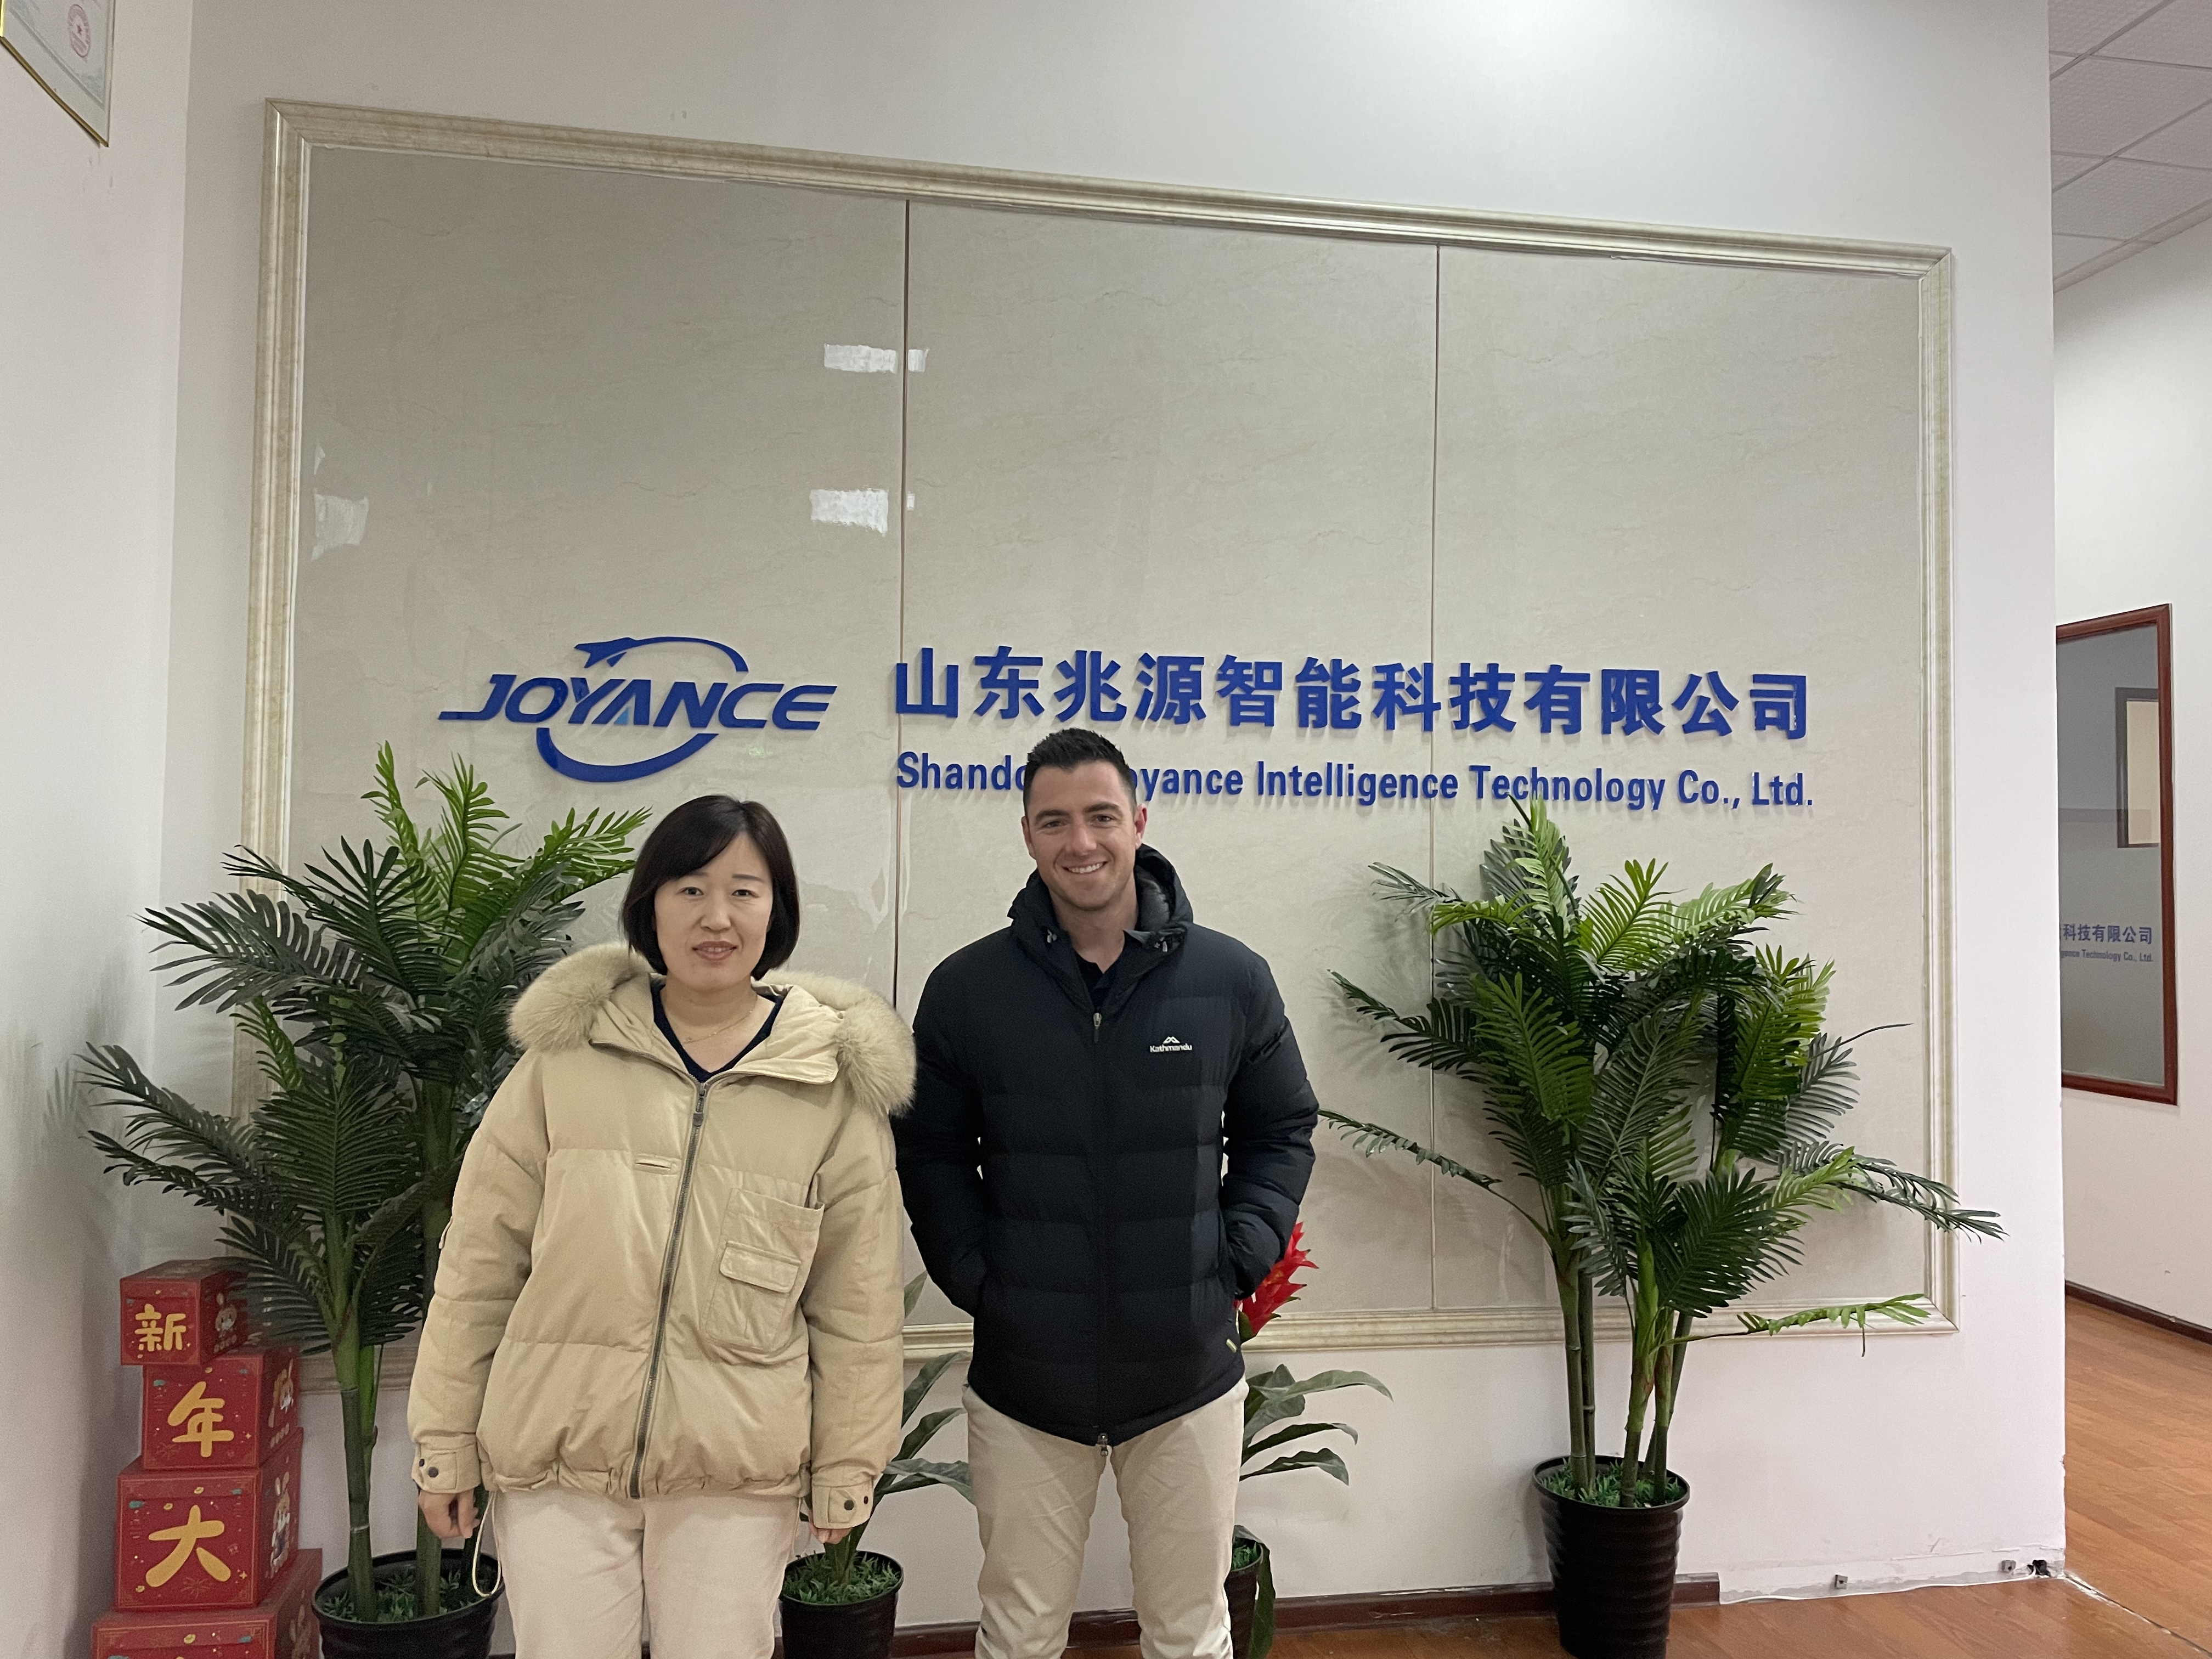 Customers from Australia visited the JOYANCE drone factory 